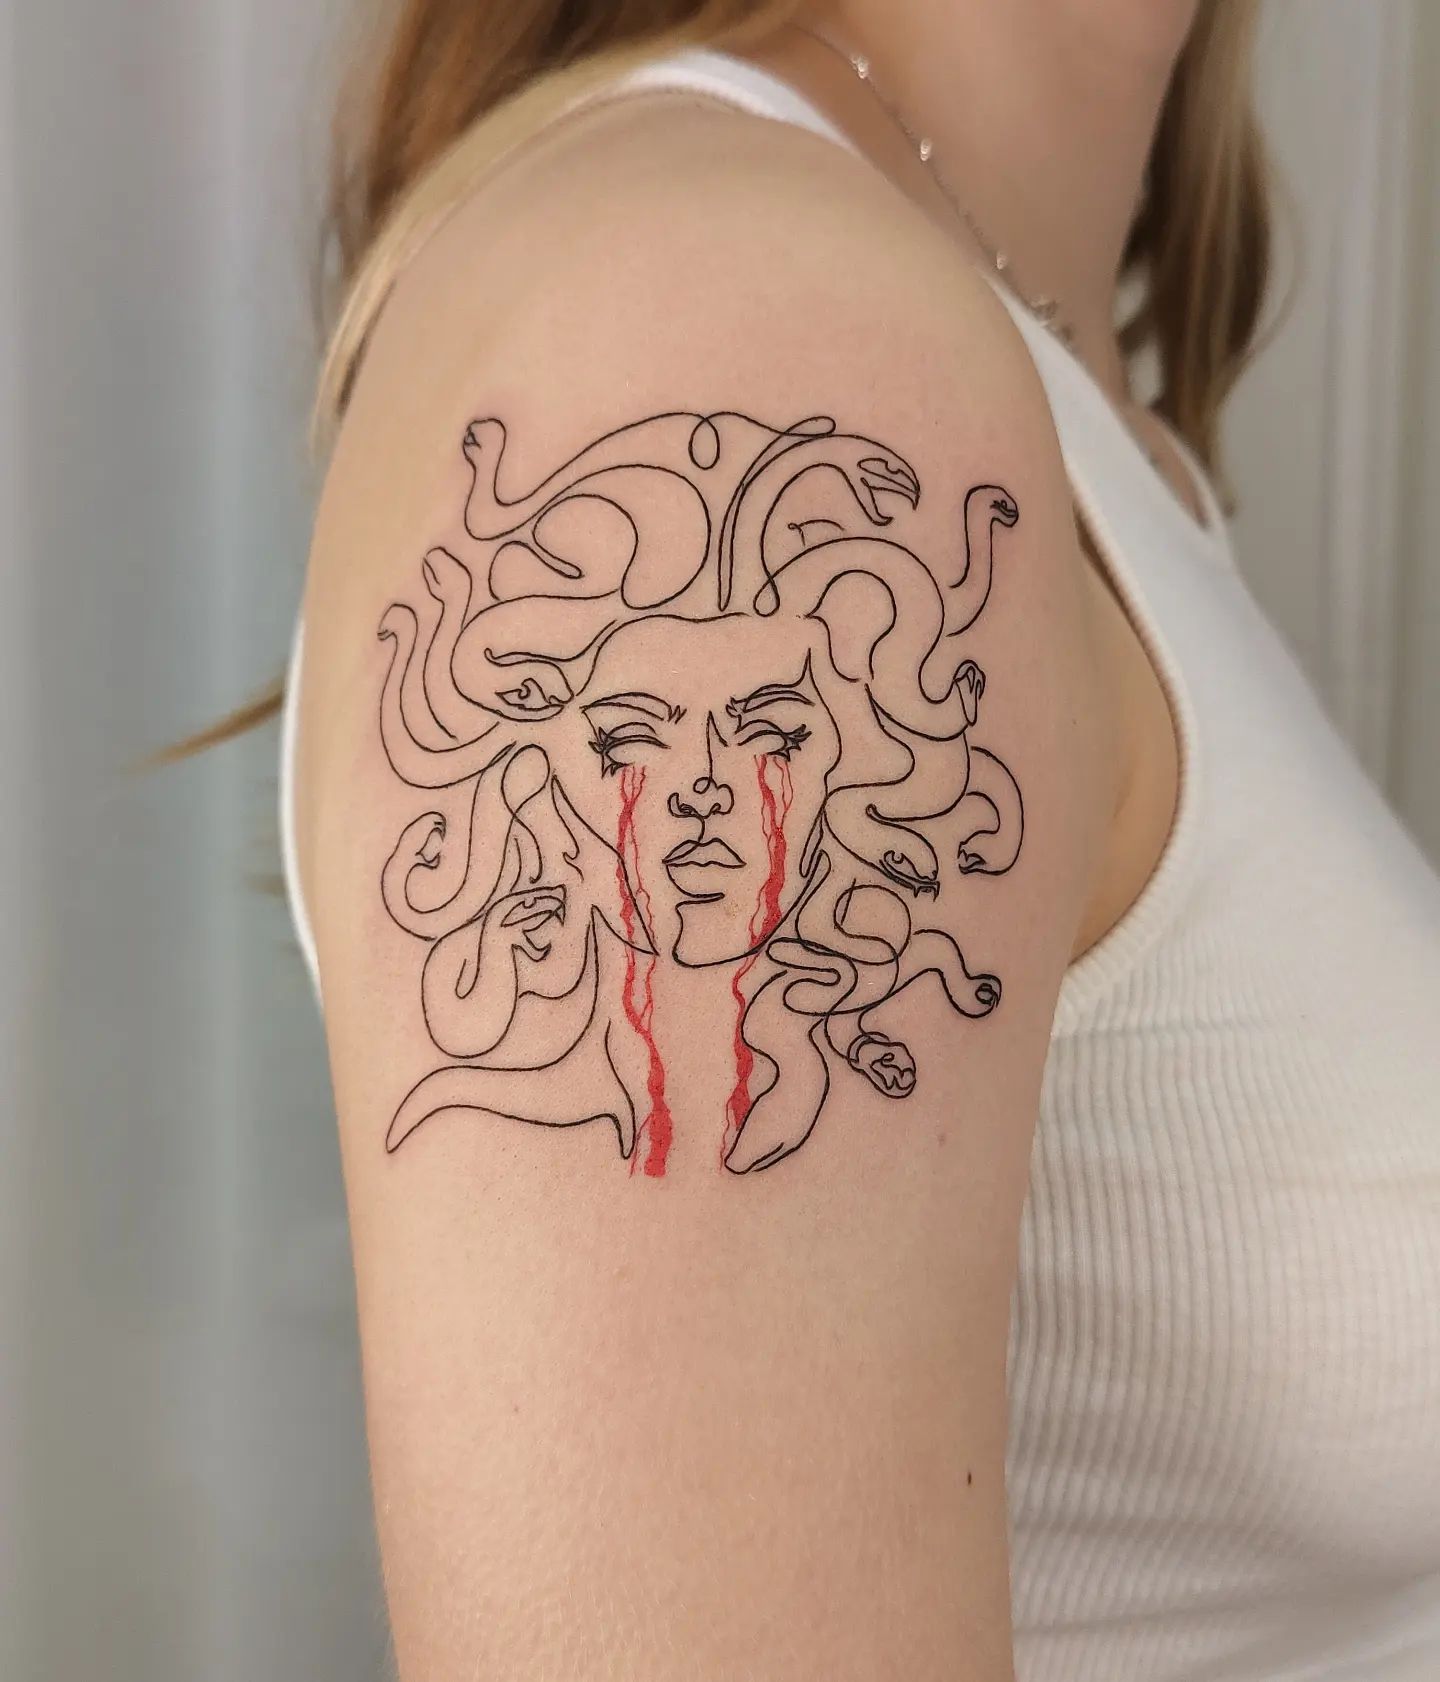 Line work tattoos may seem simple but actually they offer a gorgeous look for those who want a minimalist tattoo. In this design, black ink is used to create the shape of medusa and for her tears, red ink is used to make them stand out more.